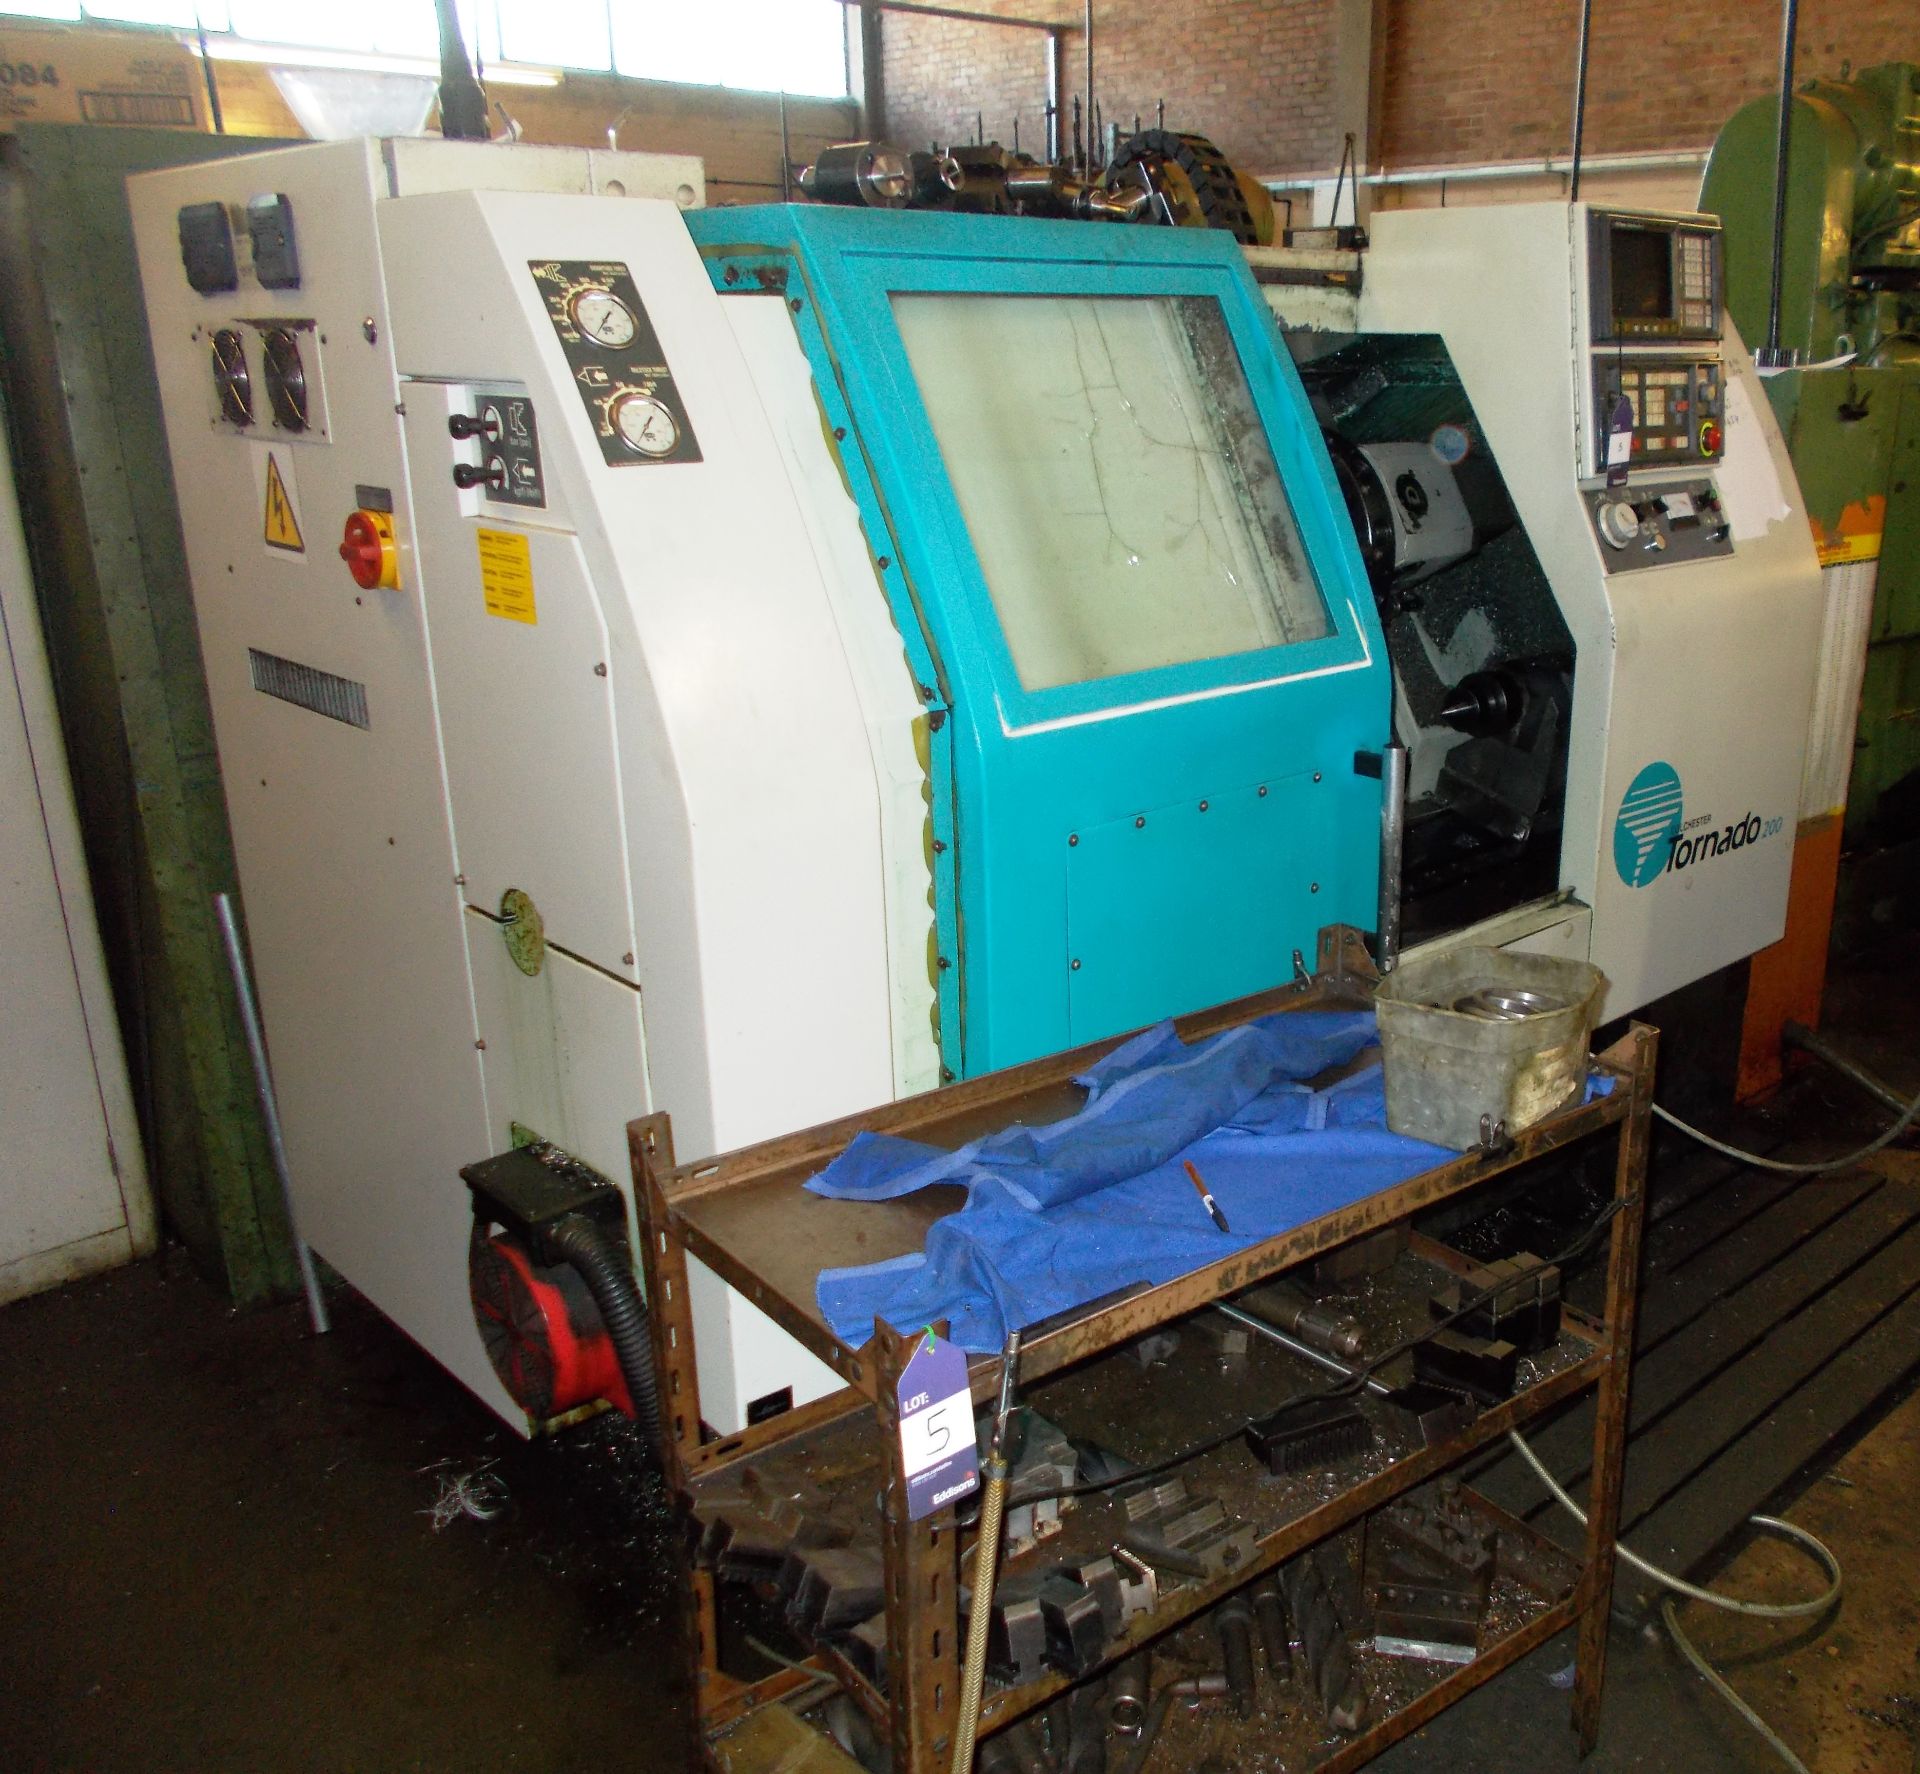 Colchester Tornado 200 CNC lathe (Serial Number: C20241, Year: 1995), with Fanuc Series OT control